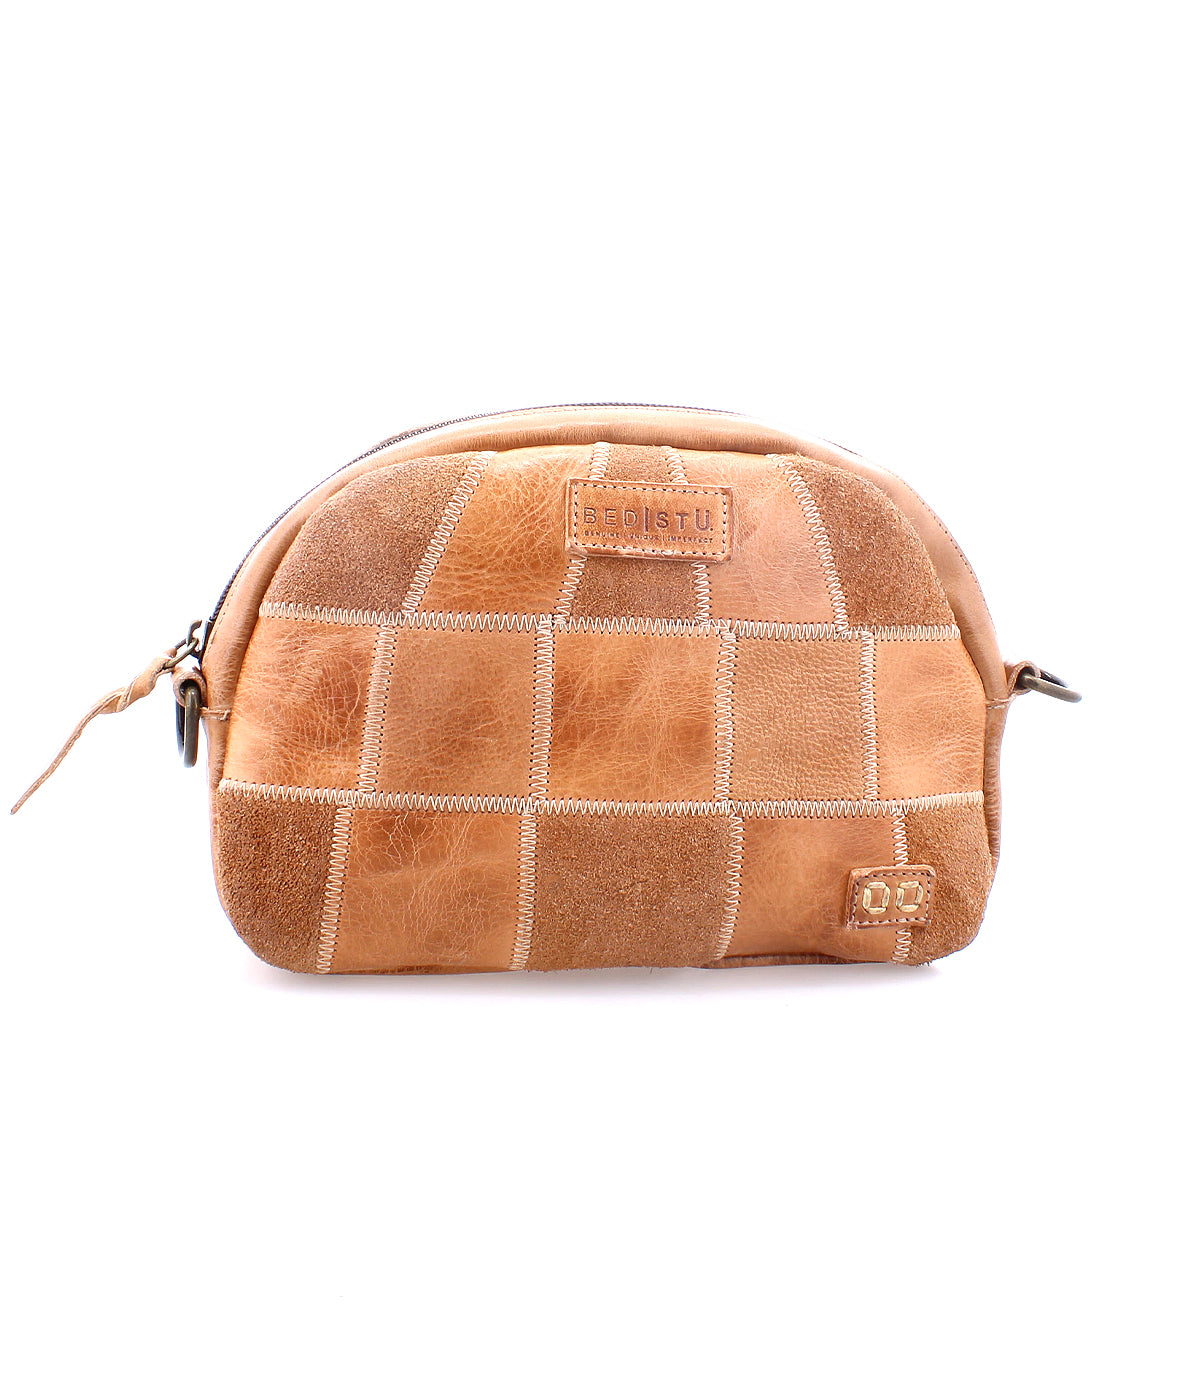 Abundance by Bed Stu leather sling bag with quilted design and zipper, isolated on white background.